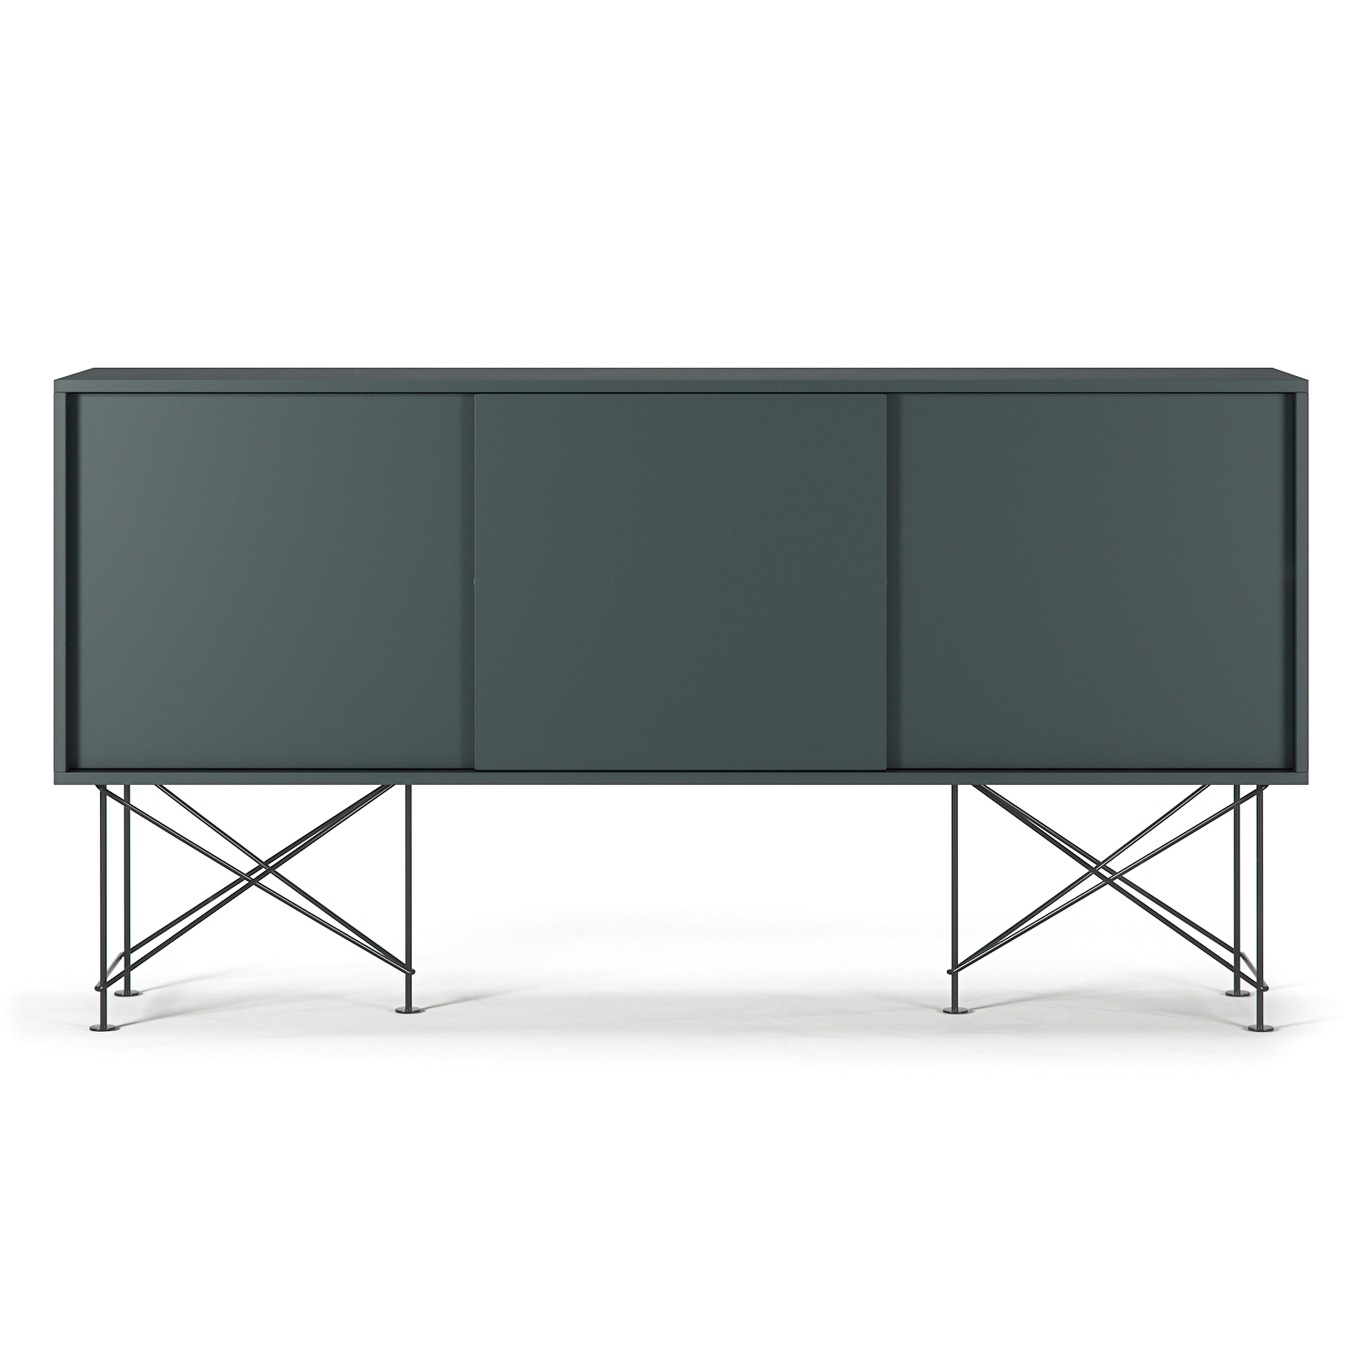 Vogue Sideboard With Stand 180 cm, Grey / Black